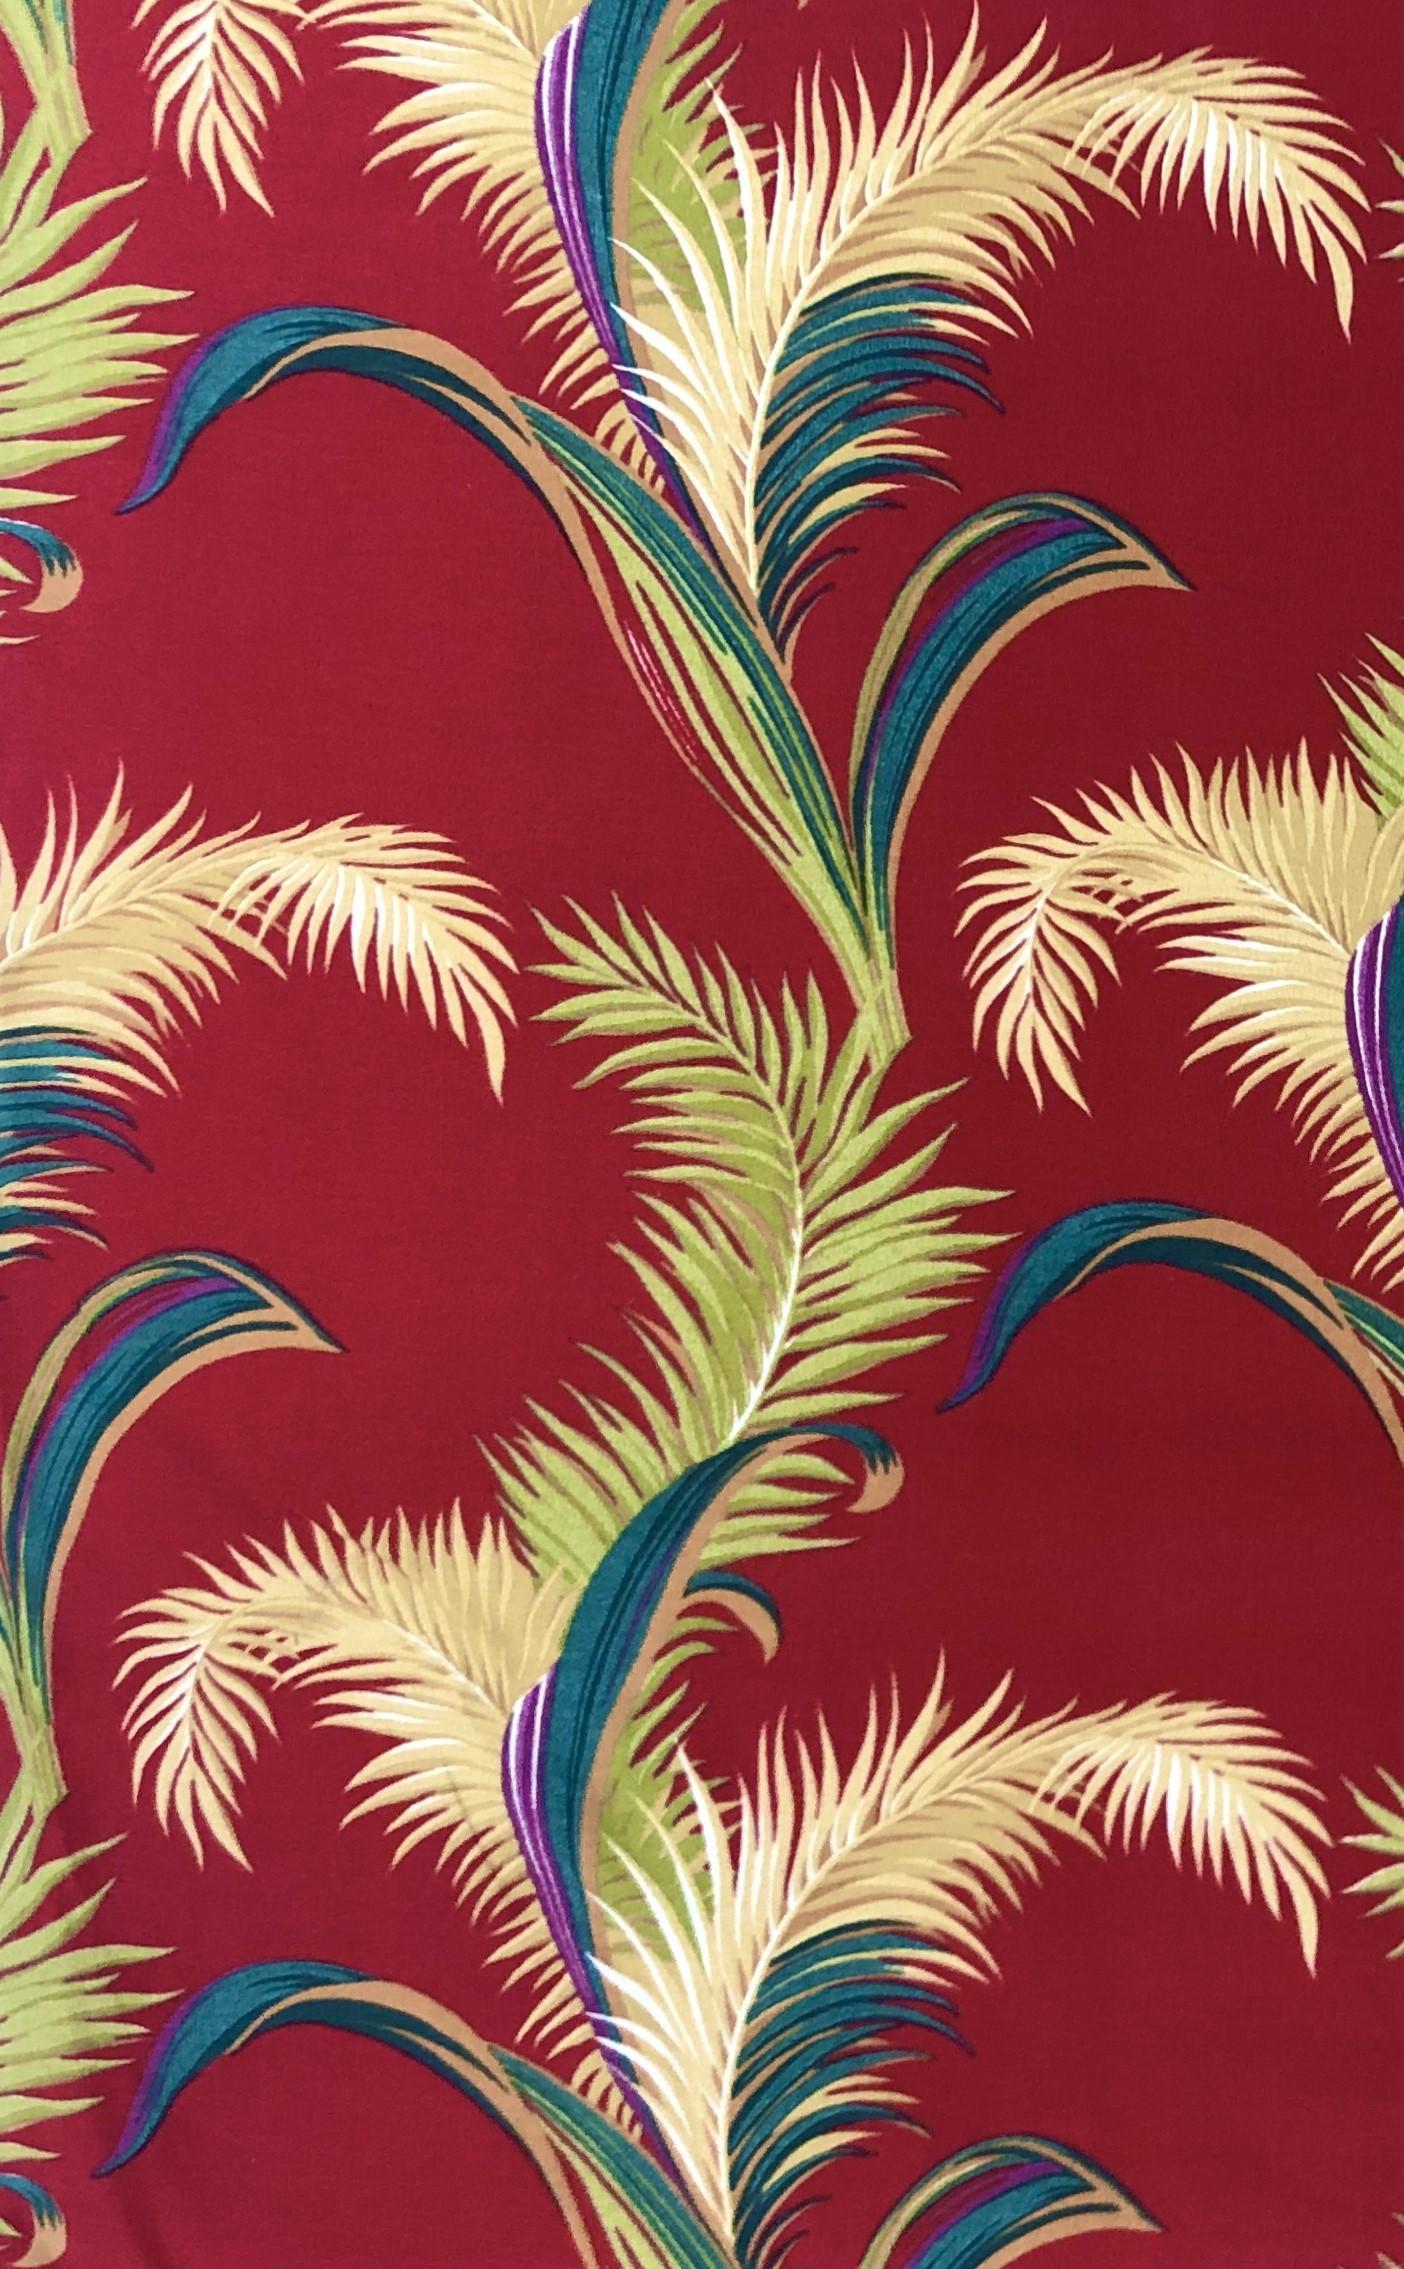 This beautiful fabric is a 100% cotton barkcloth. Barkcloth is a textured printed woven fabric. This vintage fabric is a rich, deep red featuring a tropical palm leaf design.

This fabric could be used to make clothing and upholstery